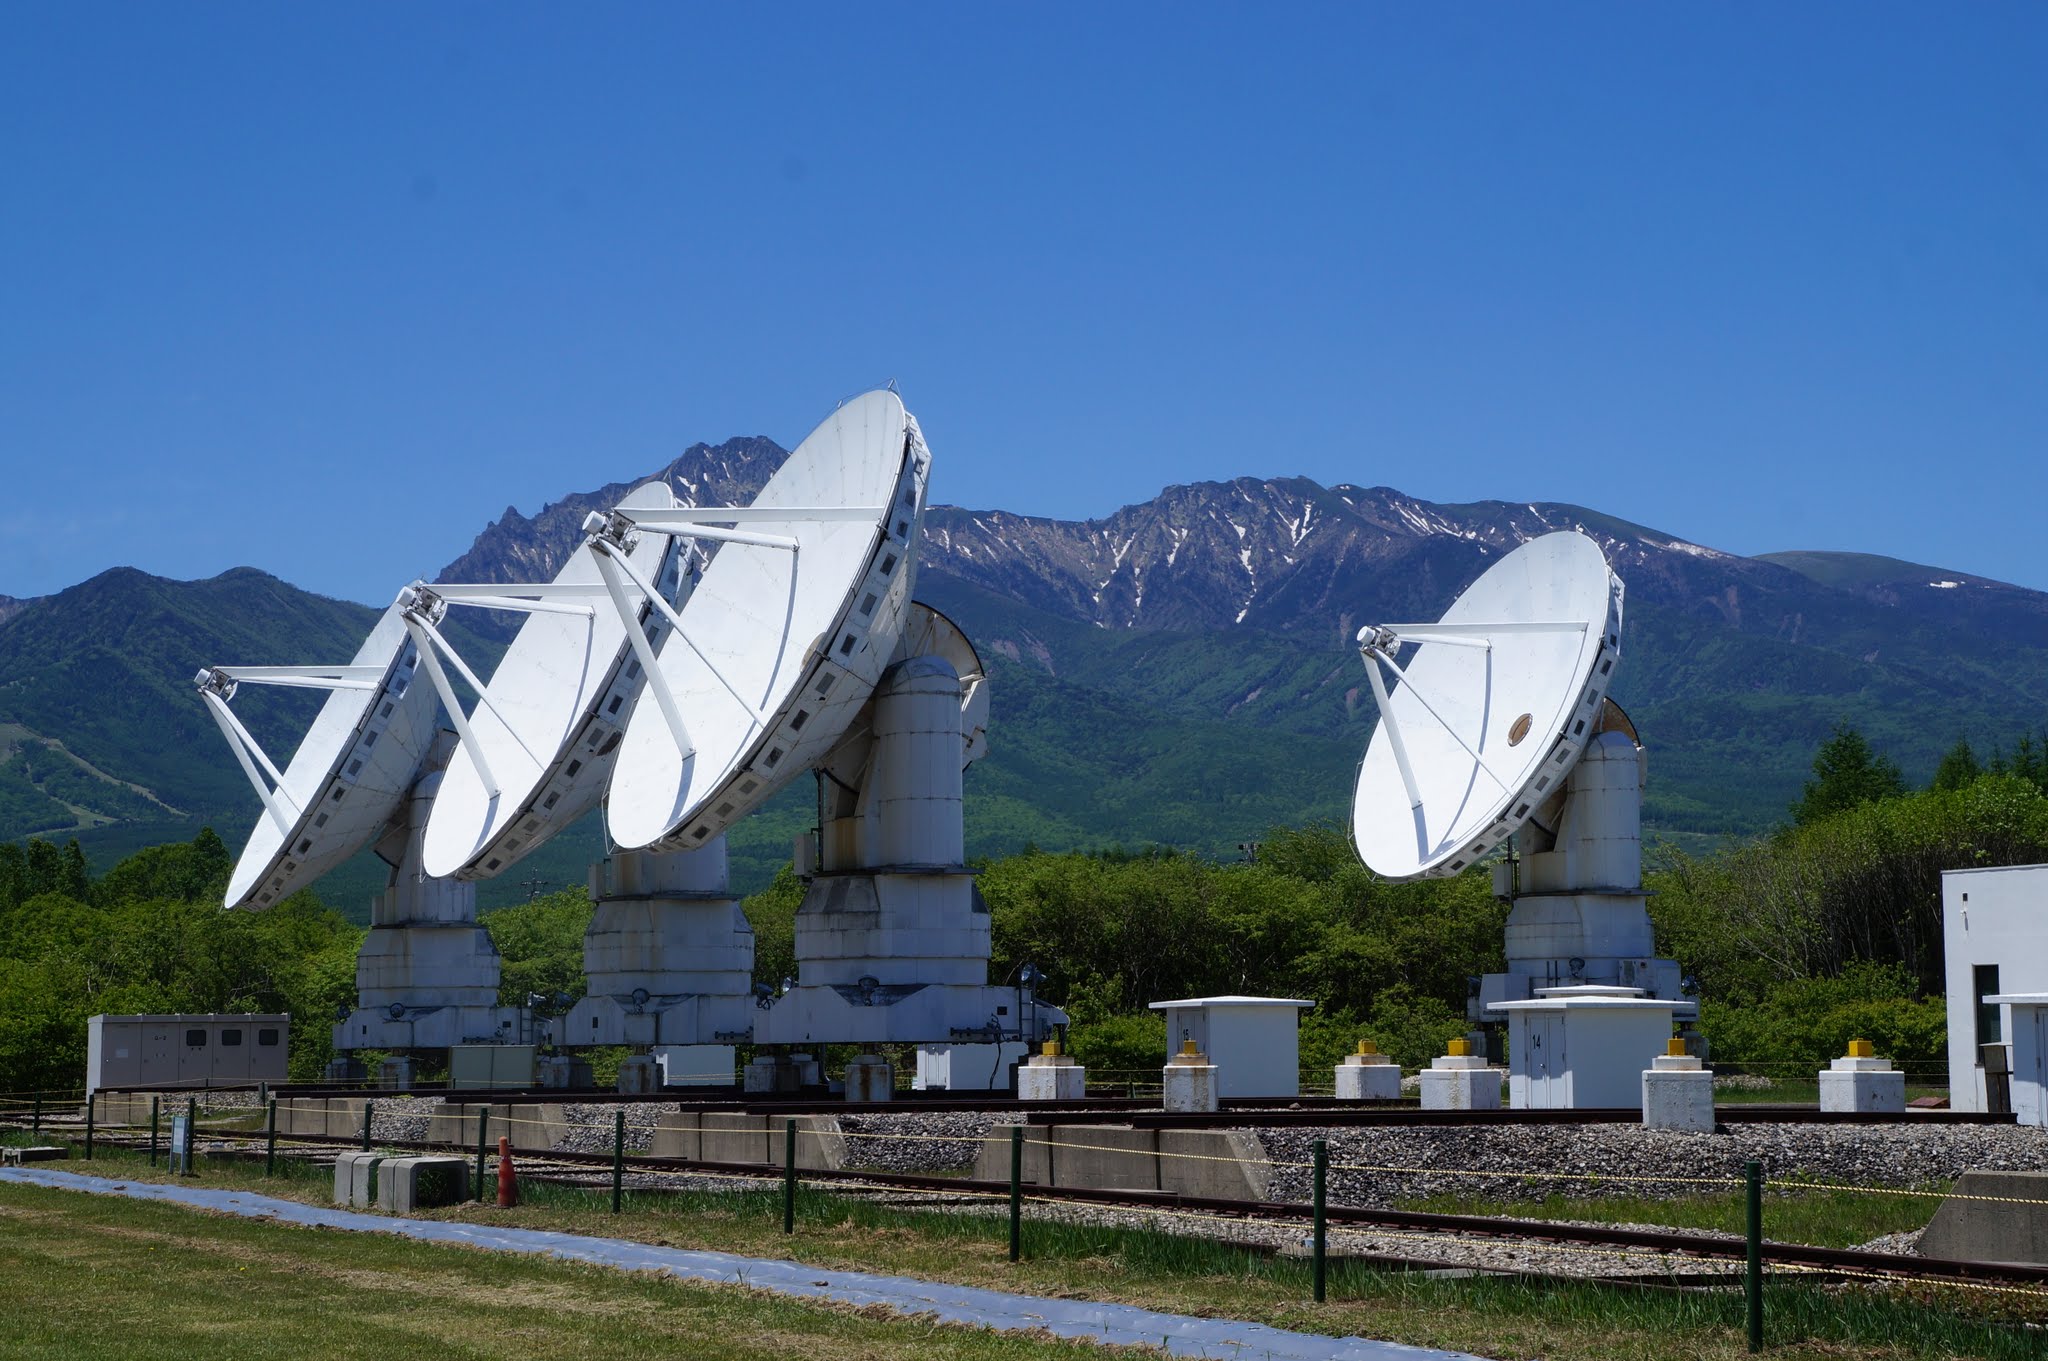 Array of radiotelescopes in front of a mountain